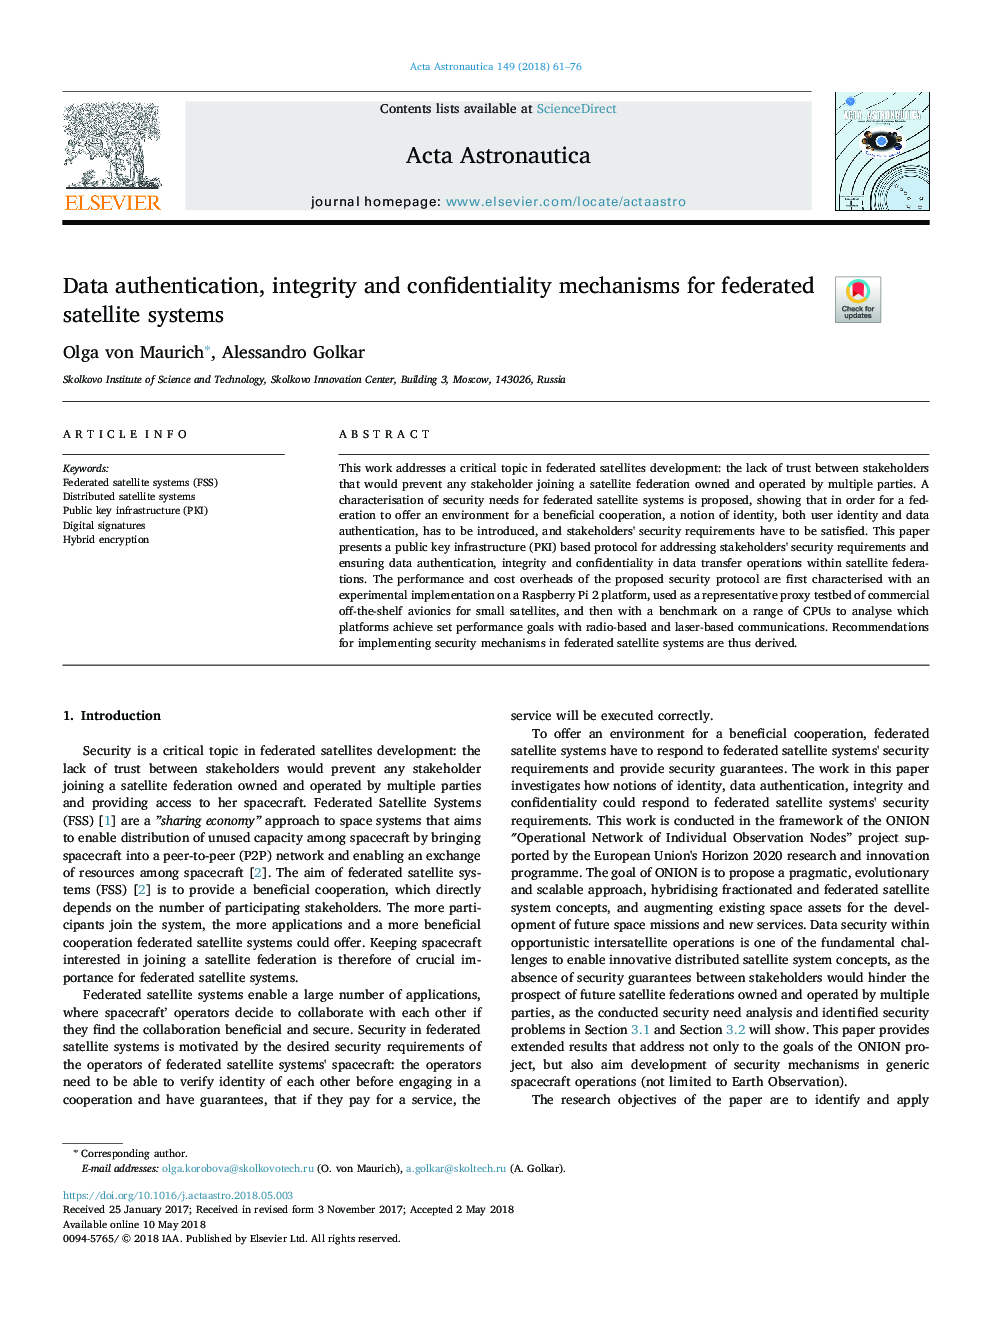 Data authentication, integrity and confidentiality mechanisms for federated satellite systems